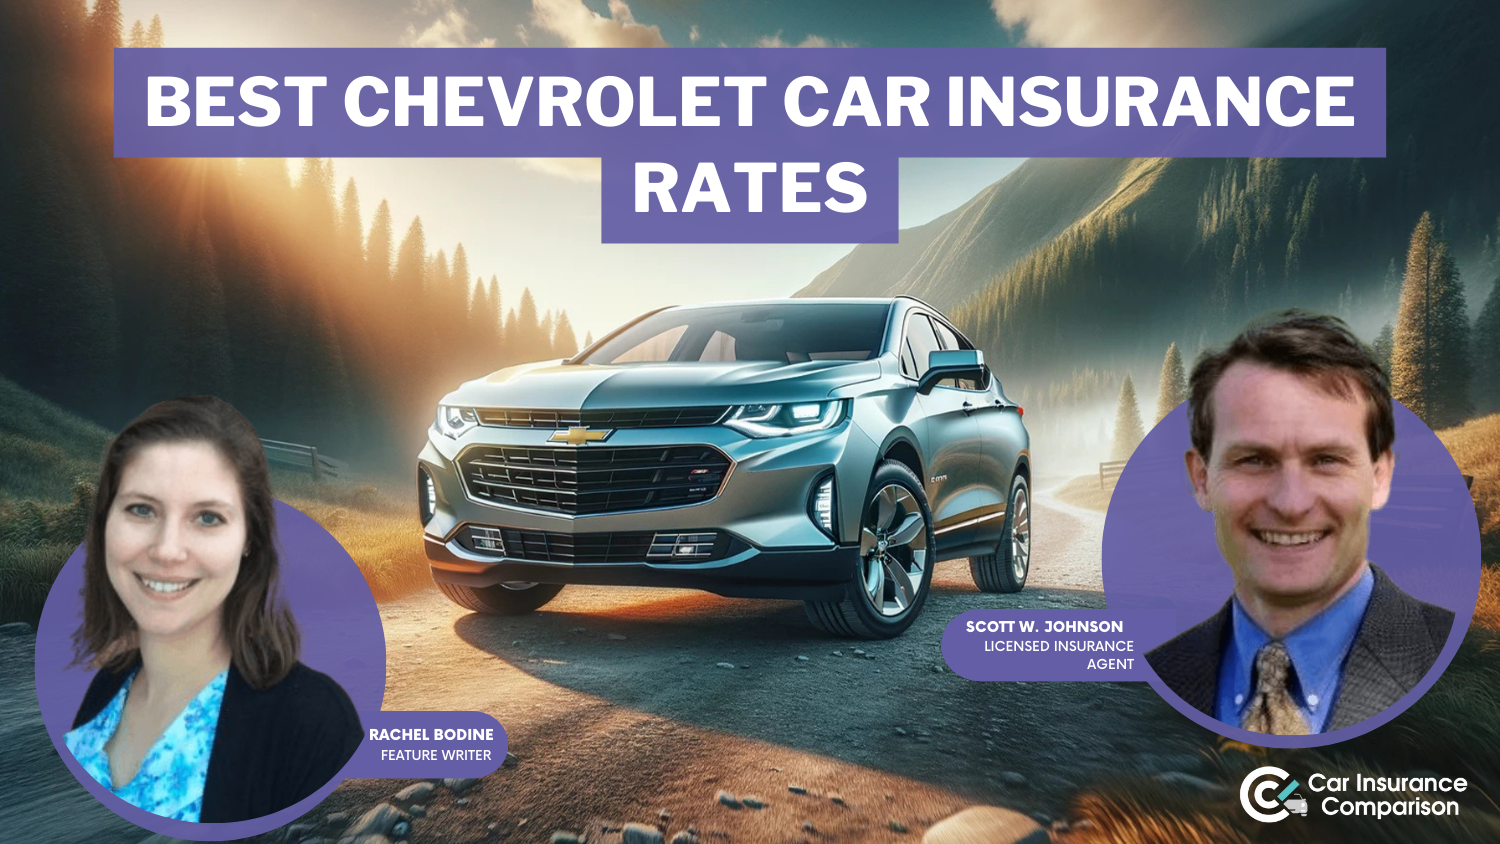 Best Chevrolet Car Insurance Rates: Geico, Travelers, and Progressive